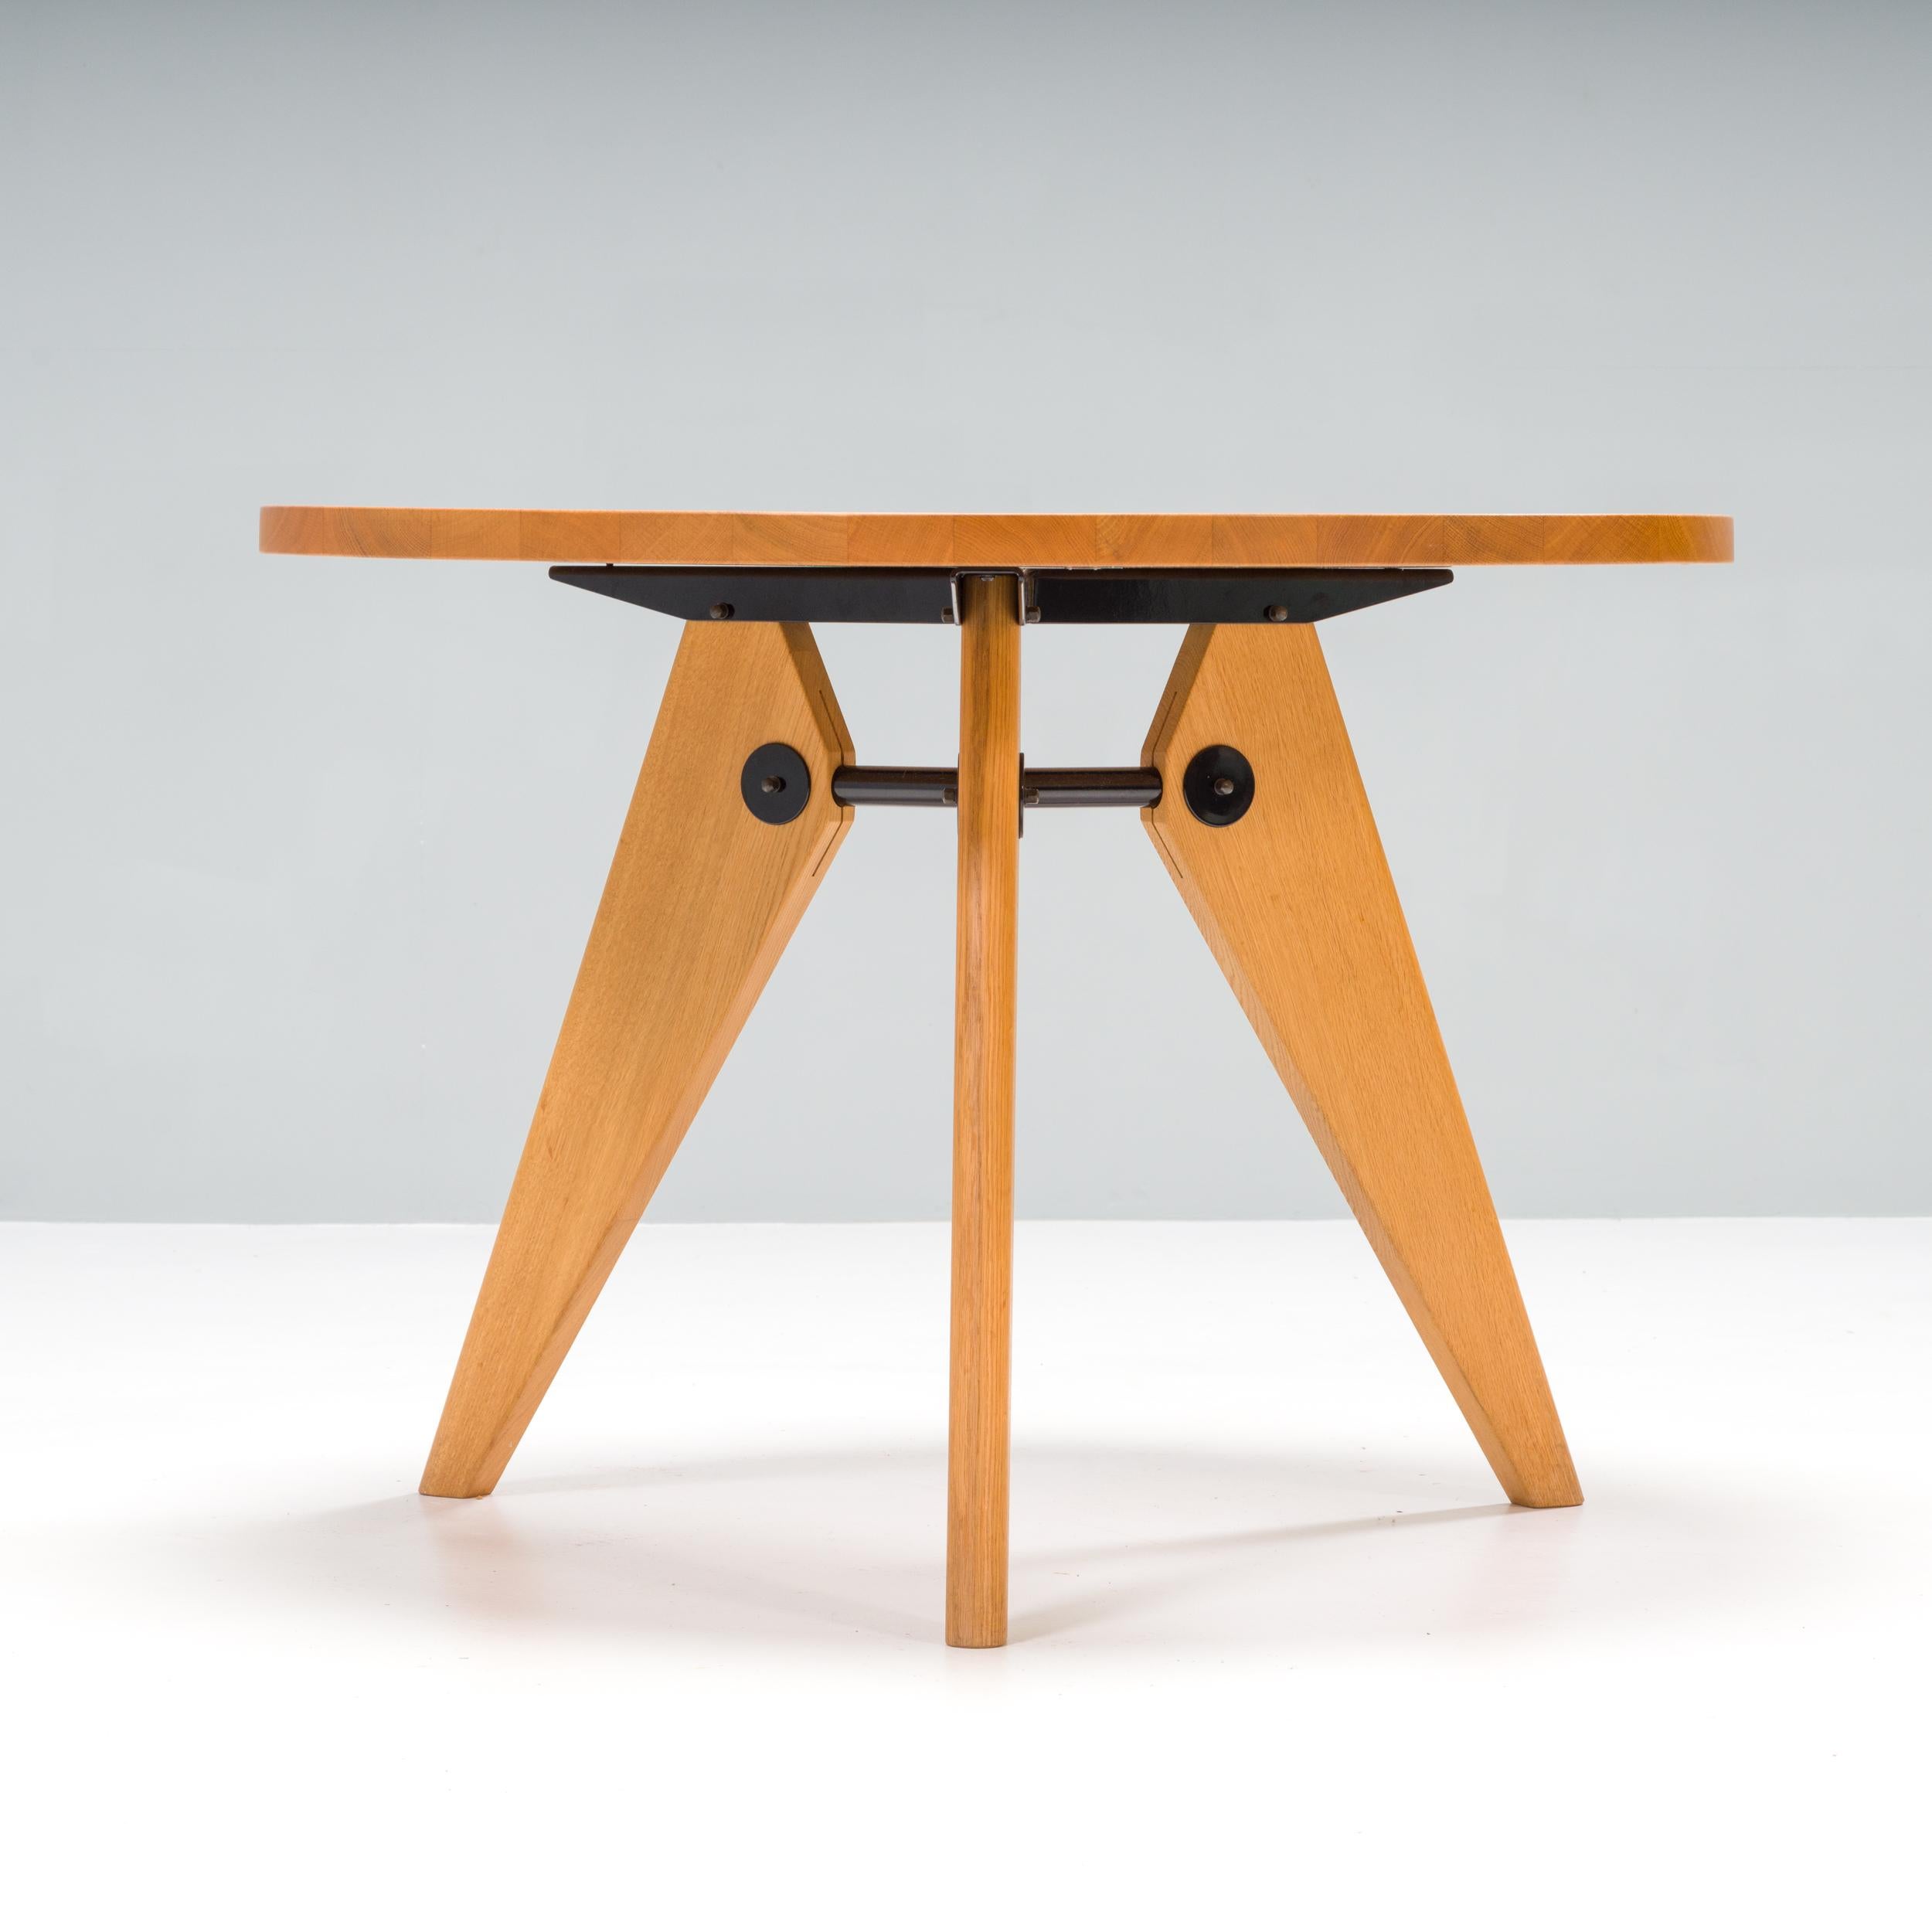 The Guéridon table was originally designed for the University of Paris by renowned furniture designer and engineer Jean Prouvé in 1949.

Manufactured by Vitra, the round dining table is constructed from solid natural oak with an oiled finish and